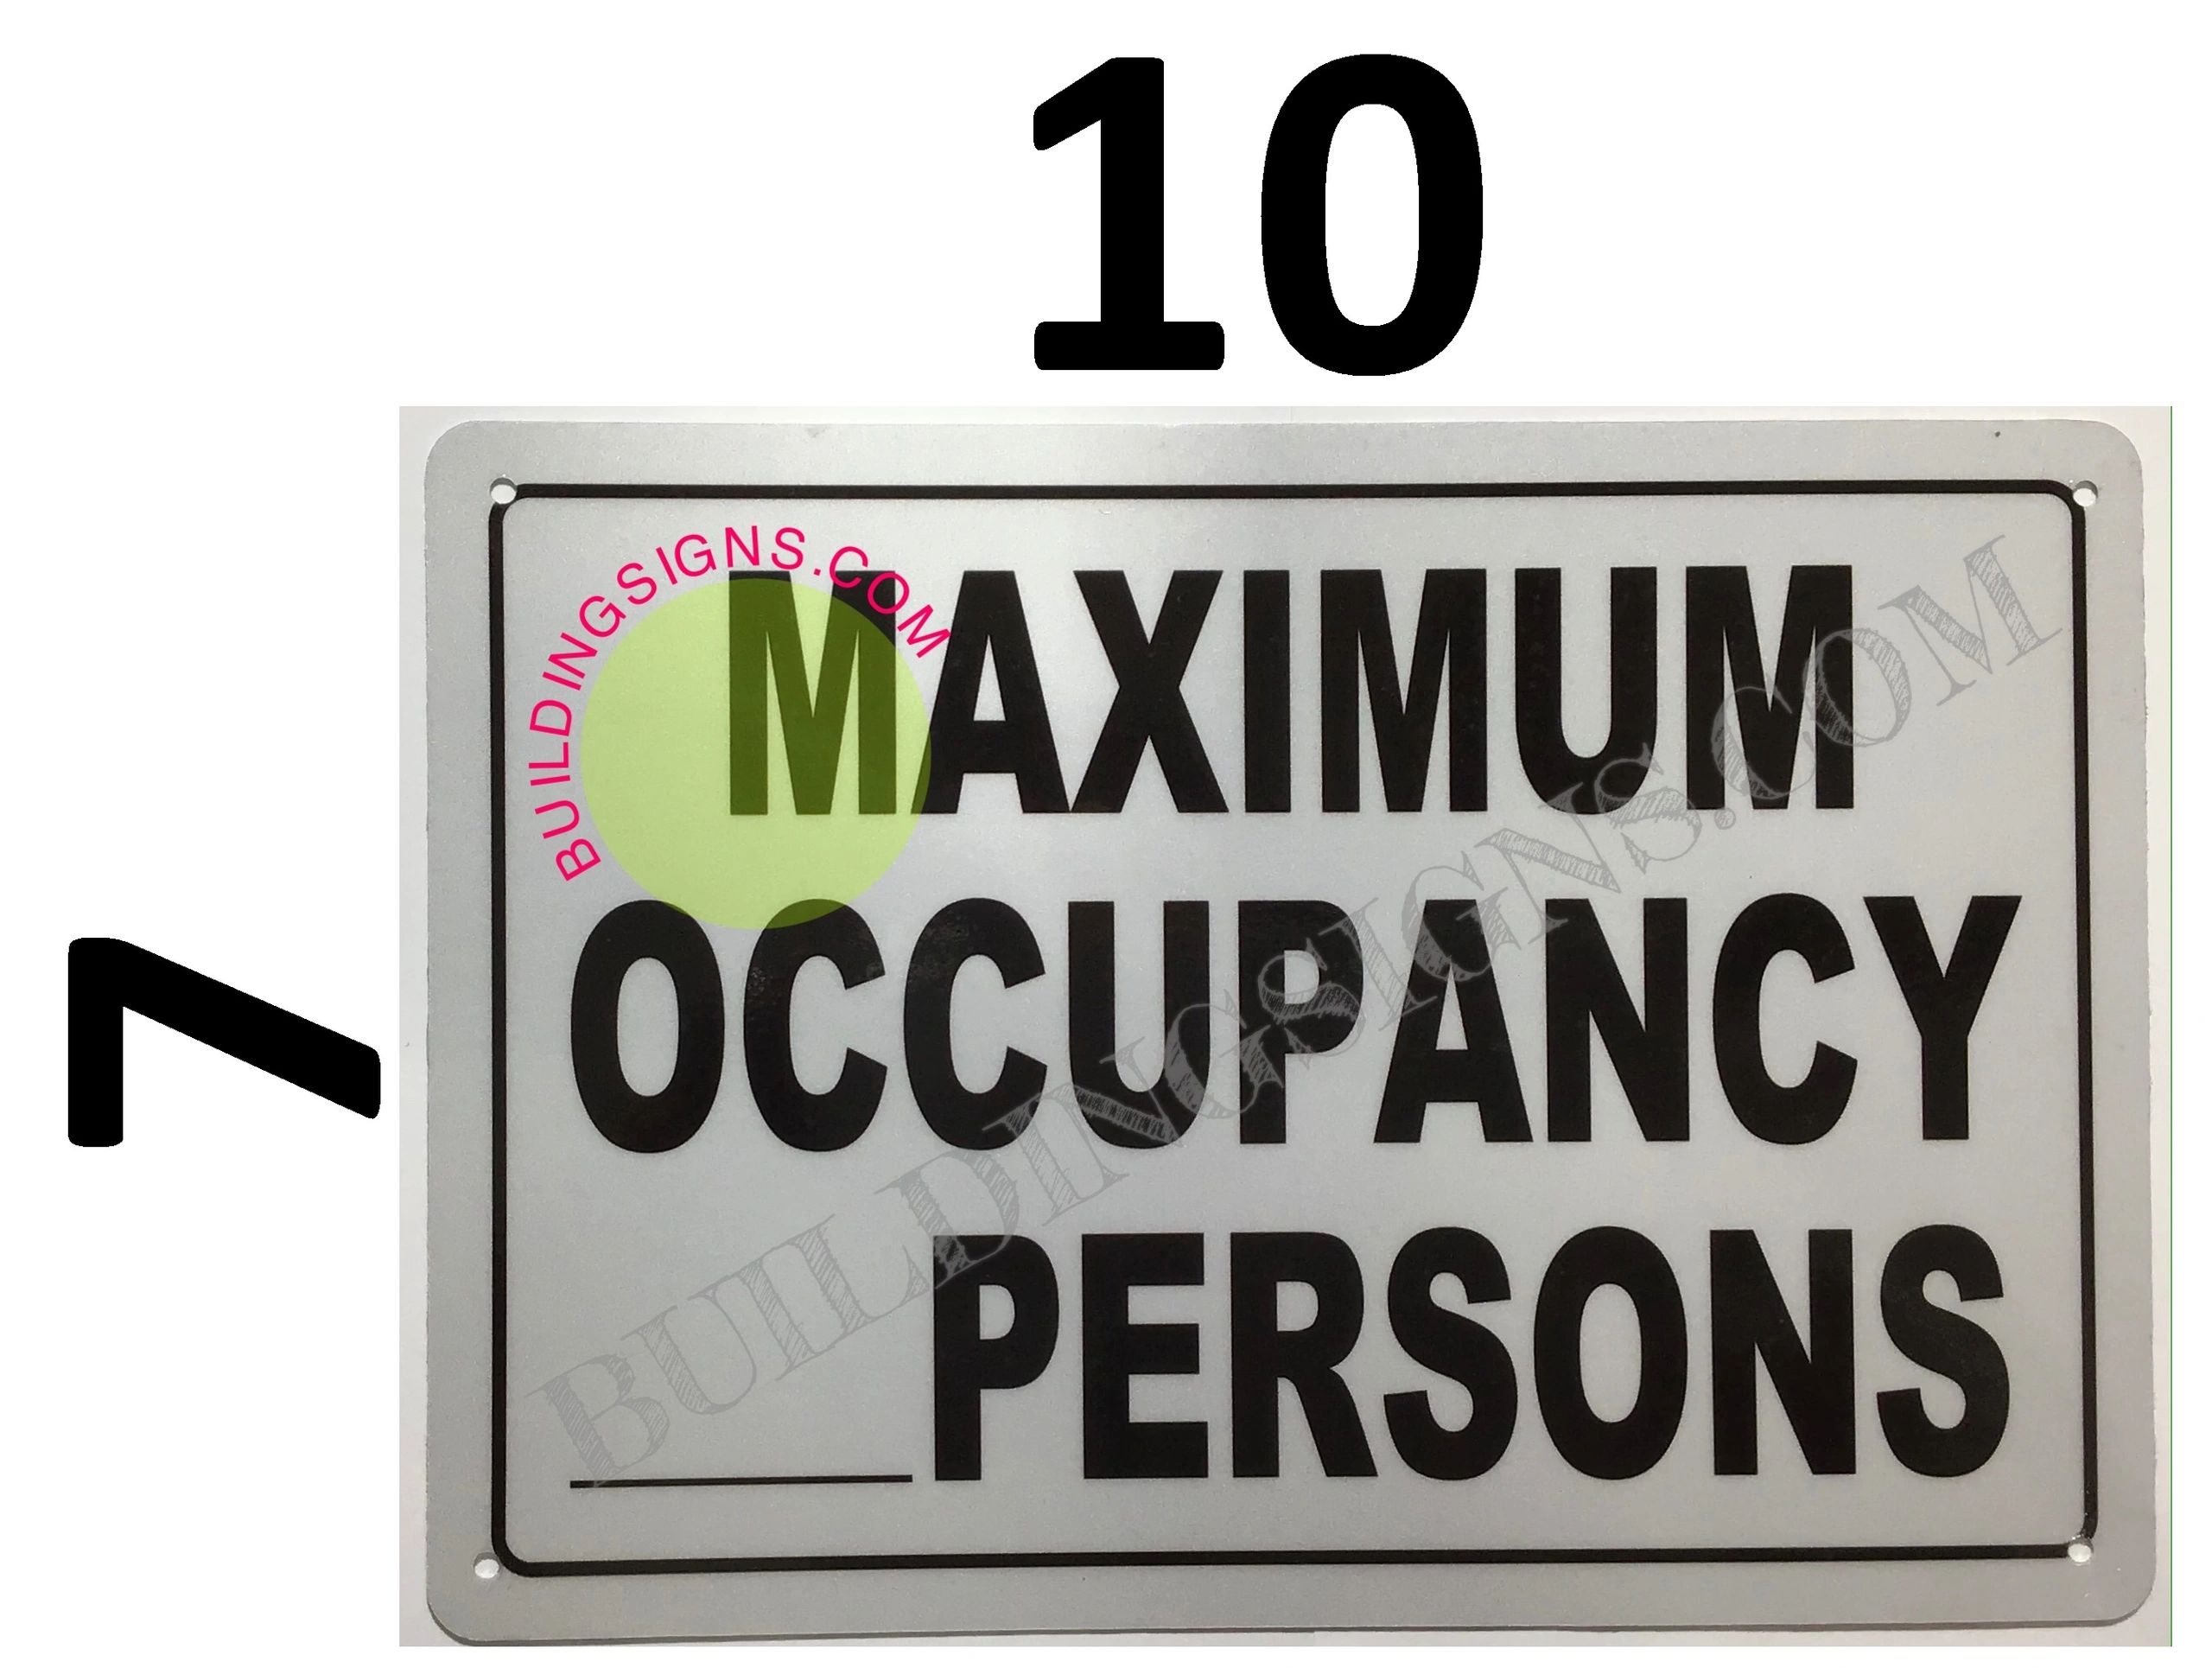 dob-sign-maximum-occupancy-sign-aluminum-self-adhesive-sign-3x8-hpd-signs-the-official-store